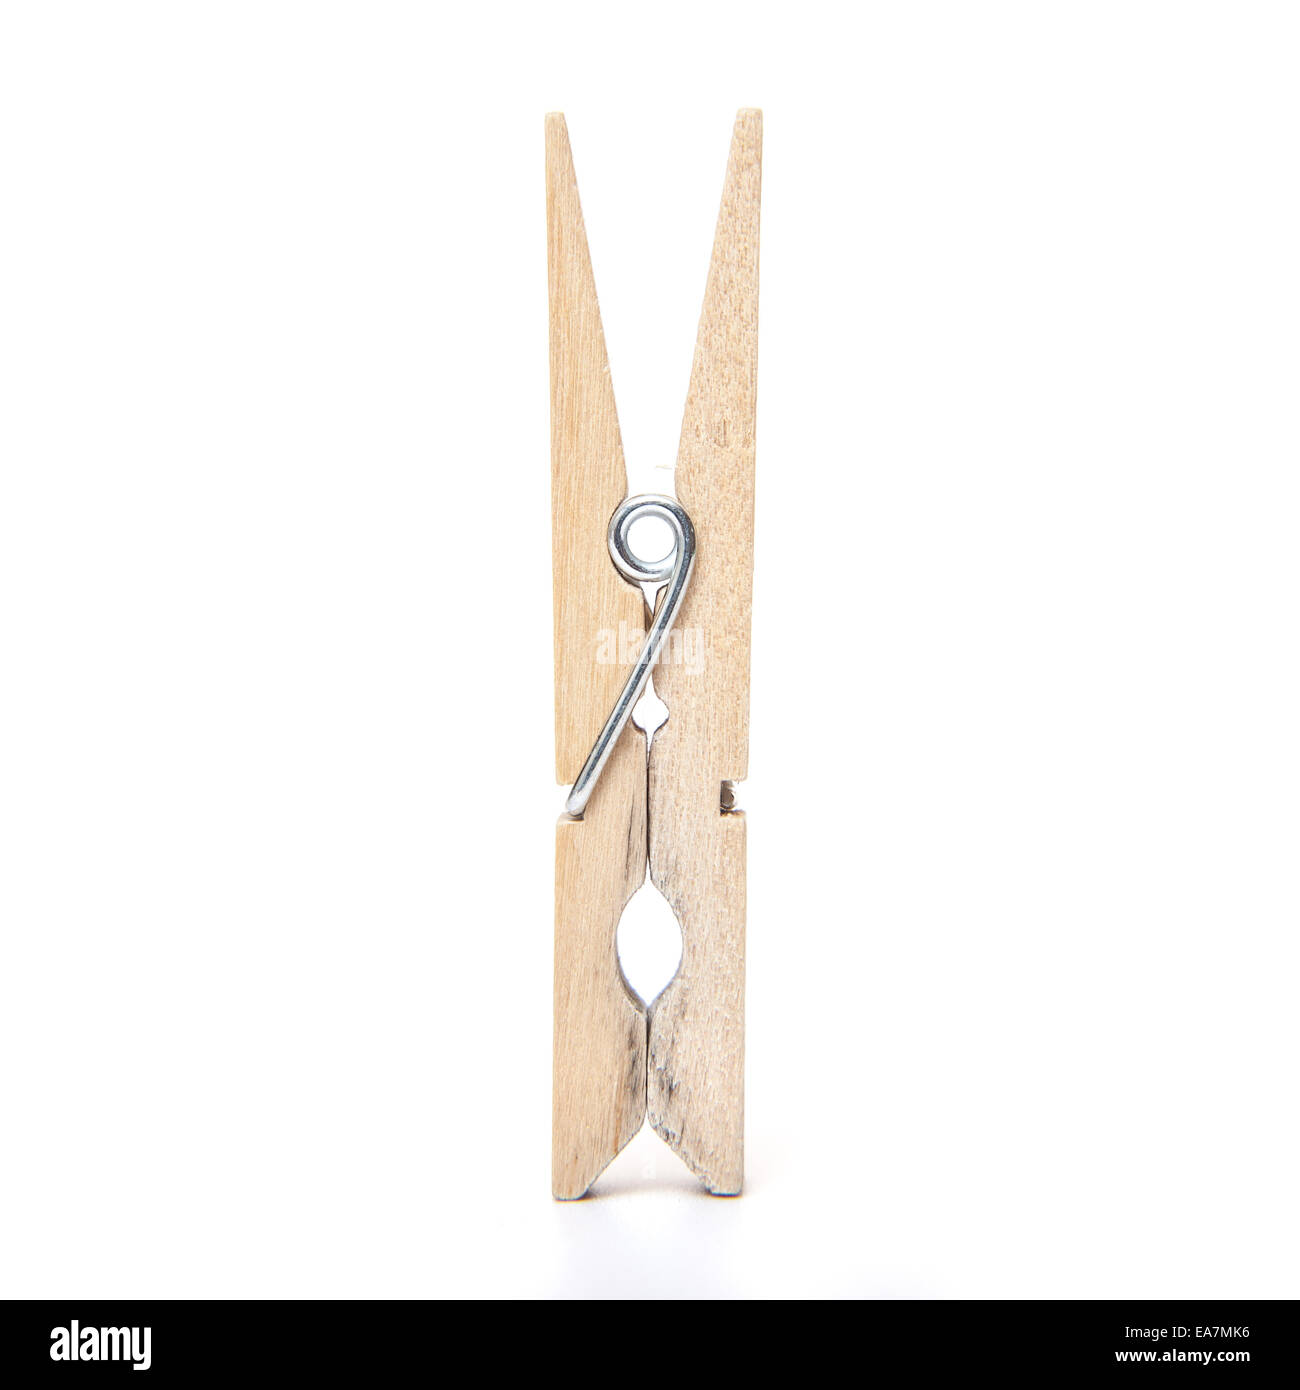 Wooden clothespin. All on white background, Stock Photo